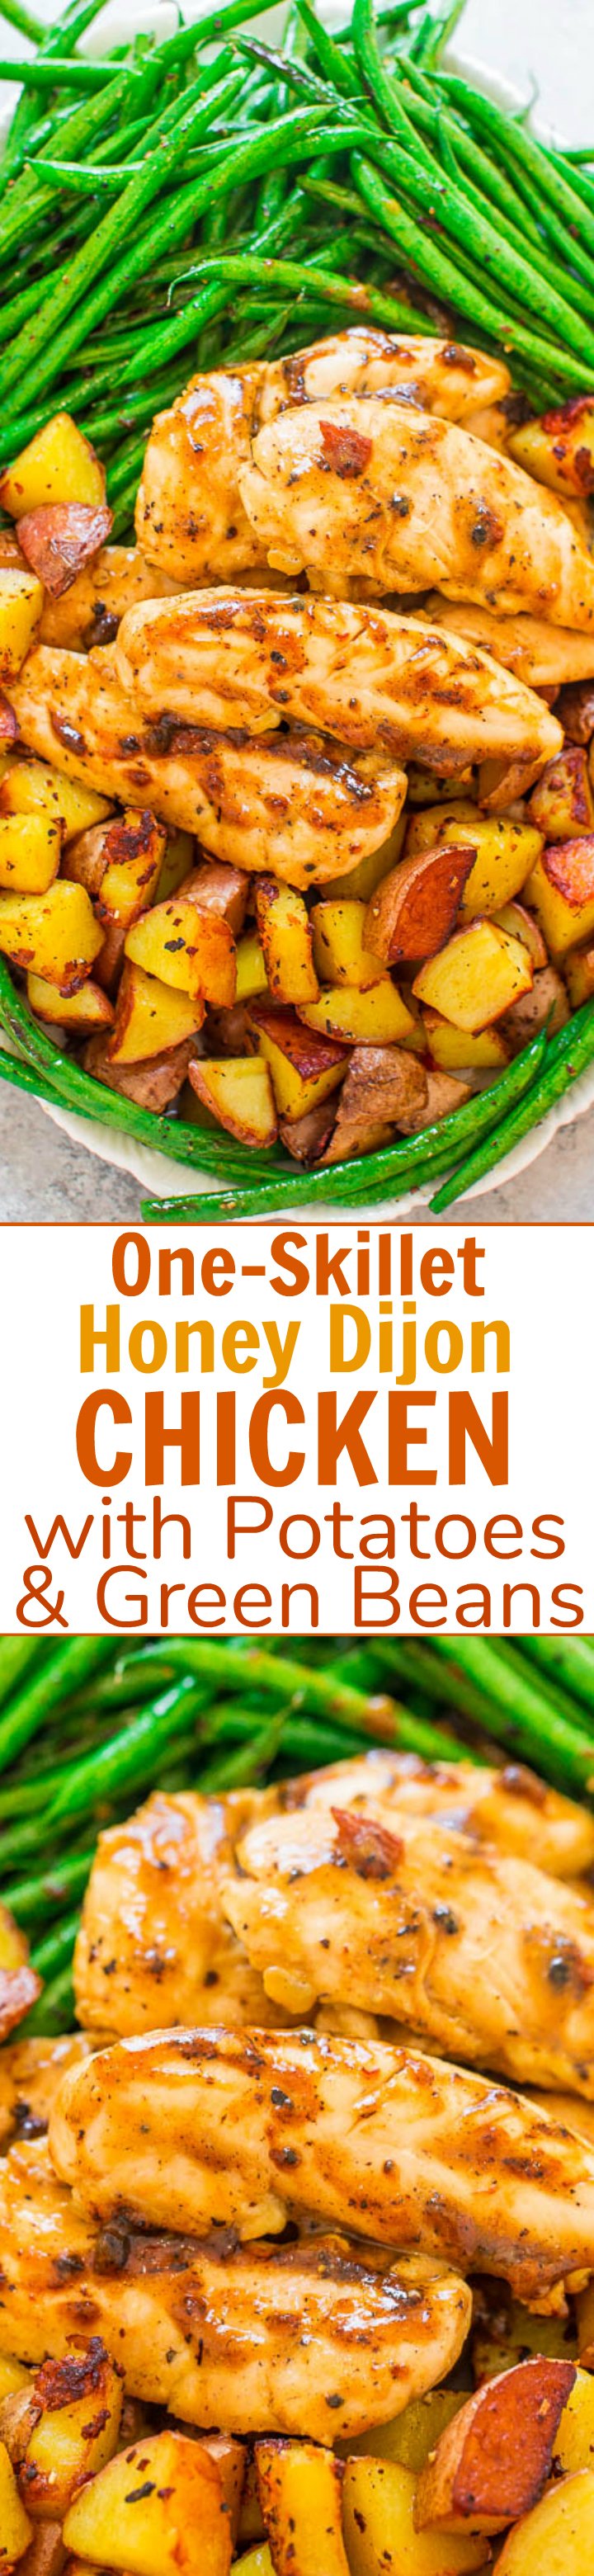 One-Skillet Honey Dijon Chicken, Green Beans, and Potatoes — An EASY, one-skillet recipe that's ready in 20 minutes!! Juicy chicken, crispy potatoes, and crisp-tender green beans for the WIN! Great for busy weeknights or date-night-in!!